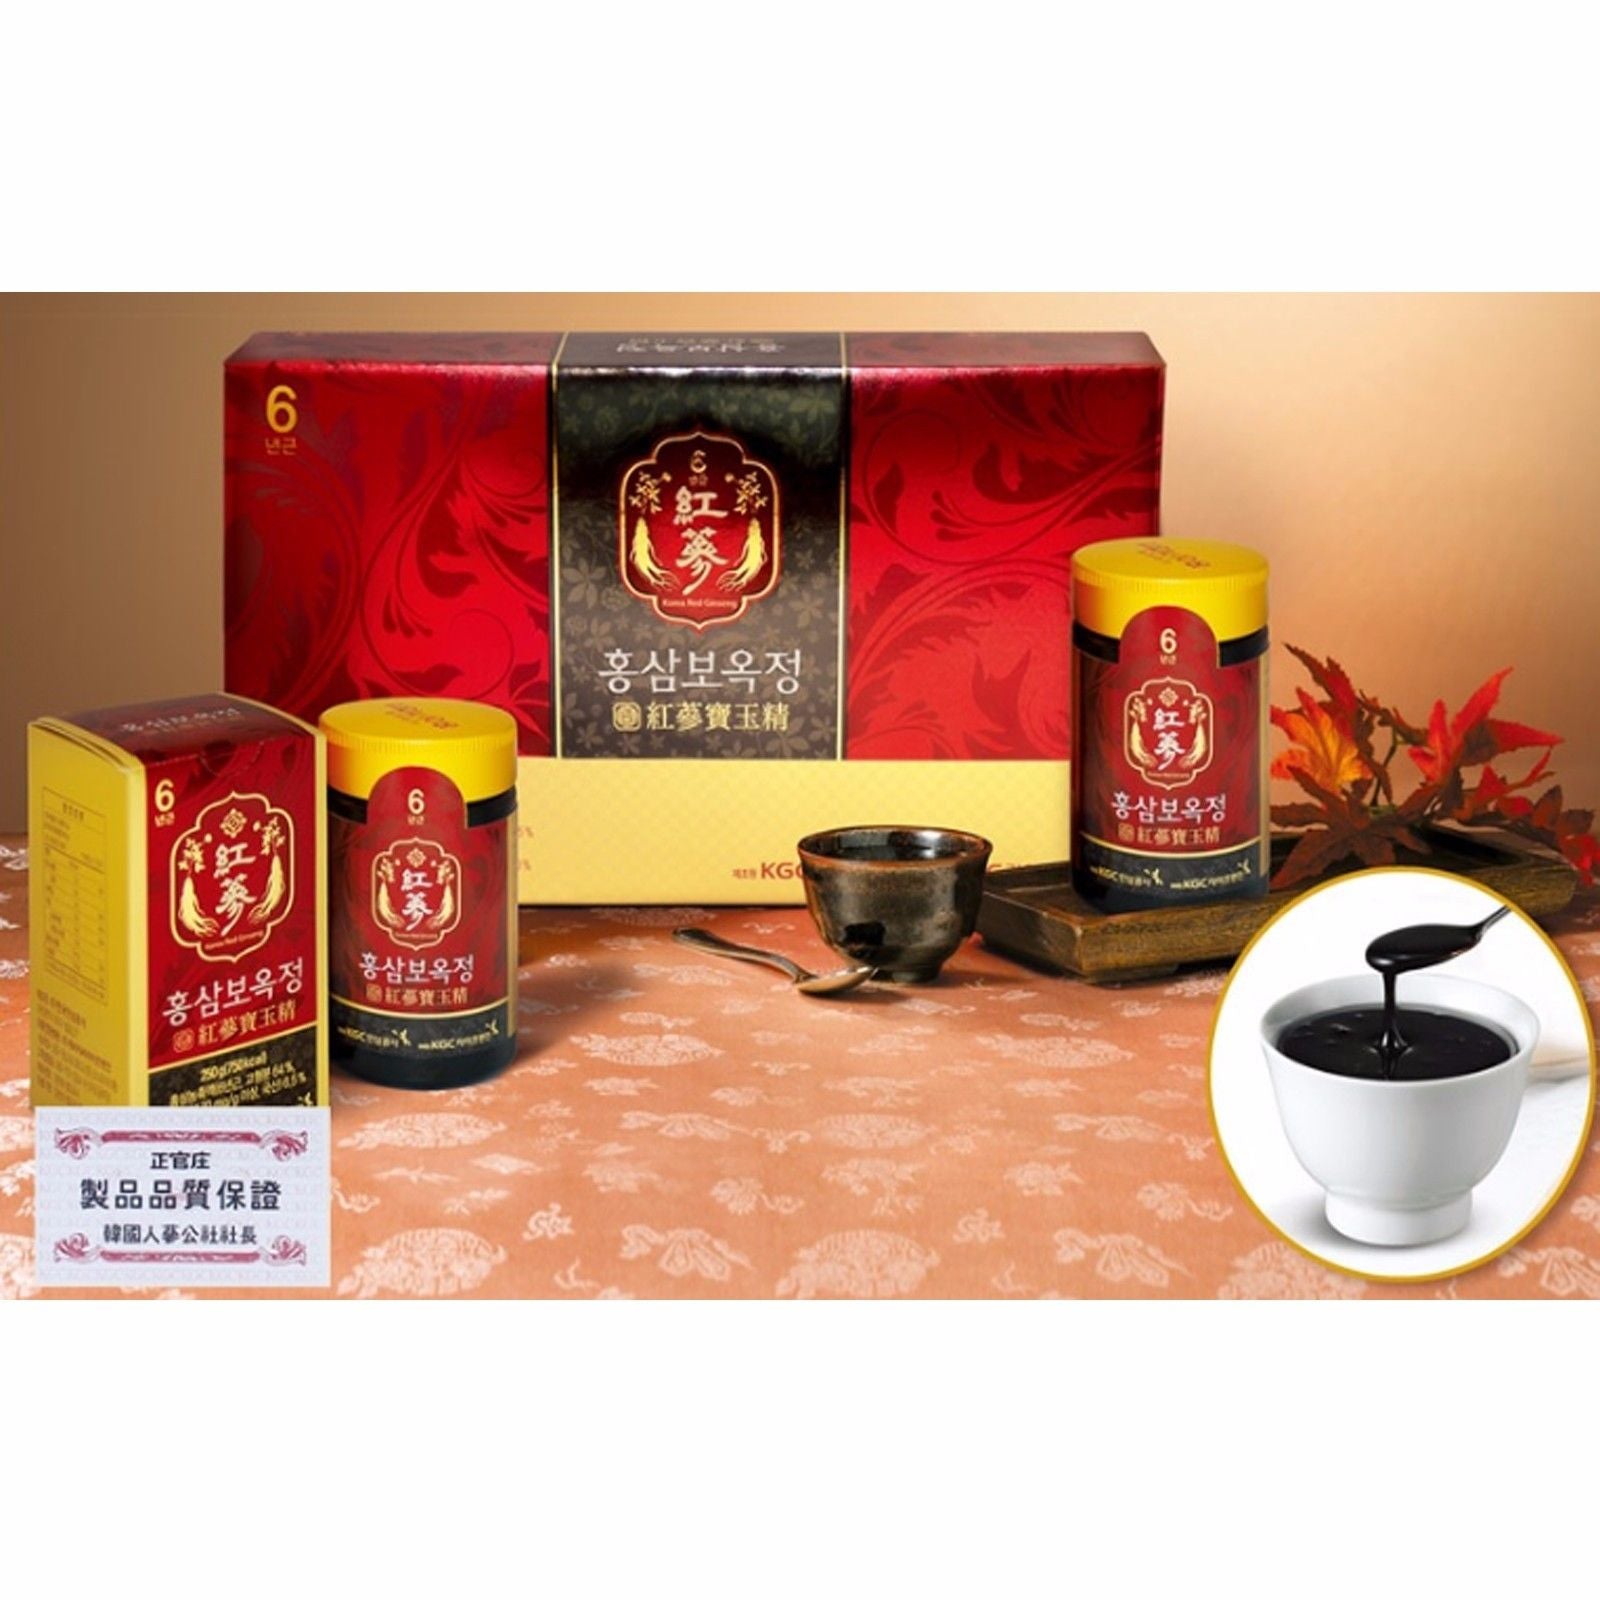 Cheong Kwan Jang 6 Years Korean Red Ginseng Extract Renesse Candy Sets